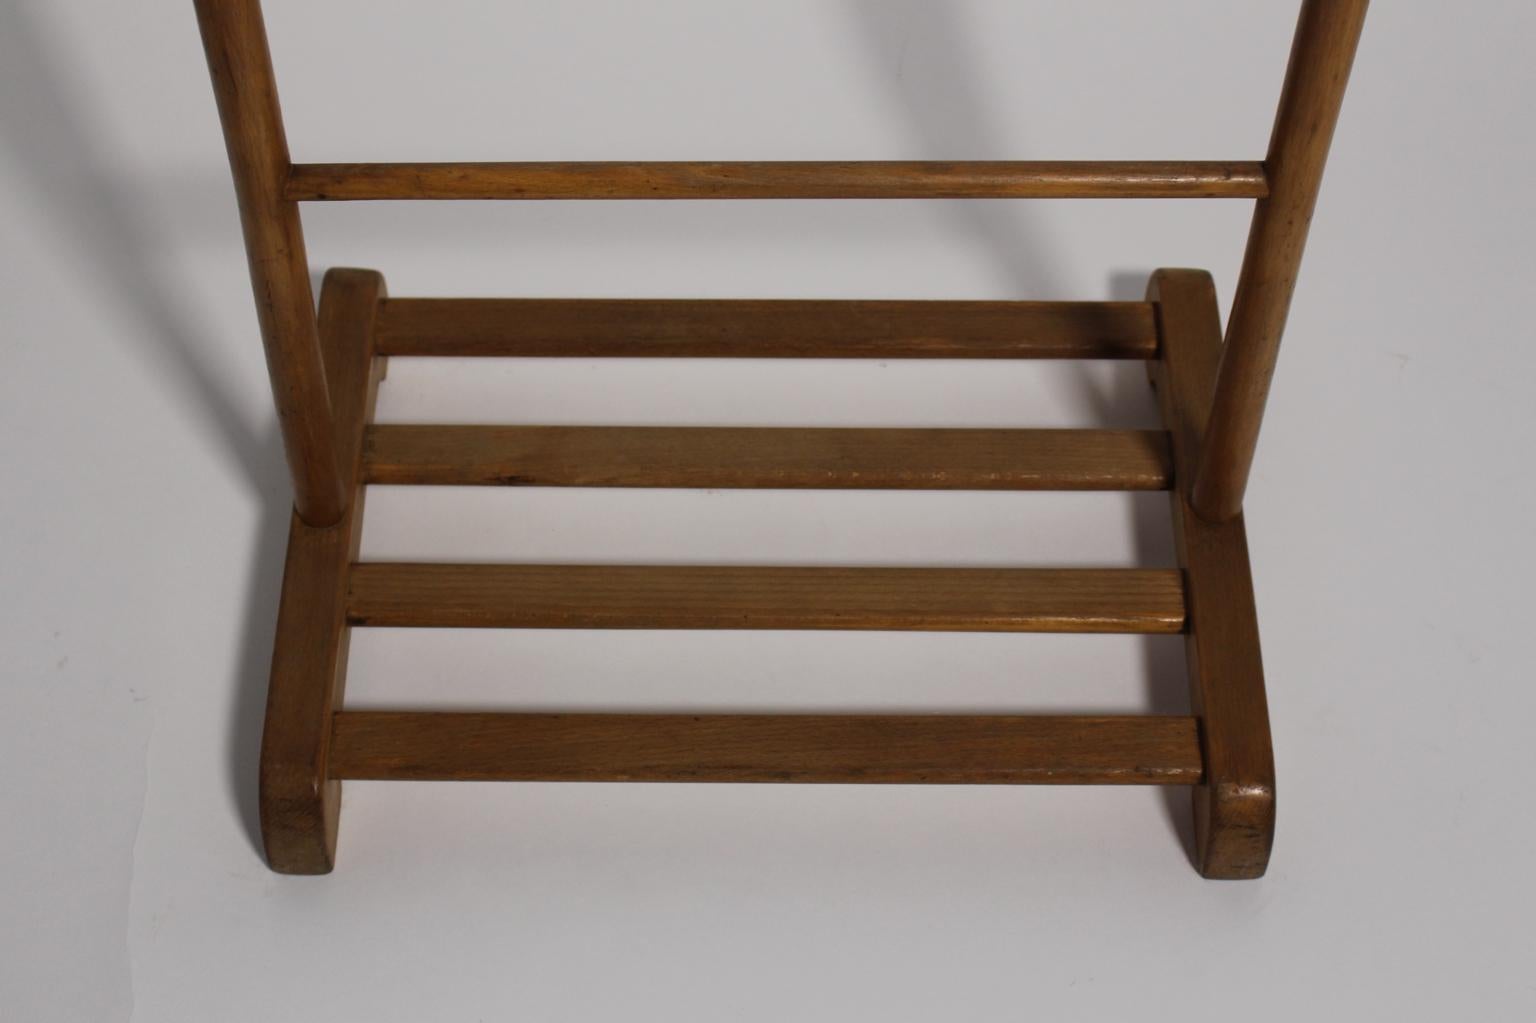 Early 20th Century Art Deco Beech Brown Vintage Valet or Coat Rack by Thonet Austria, circa 1920 For Sale